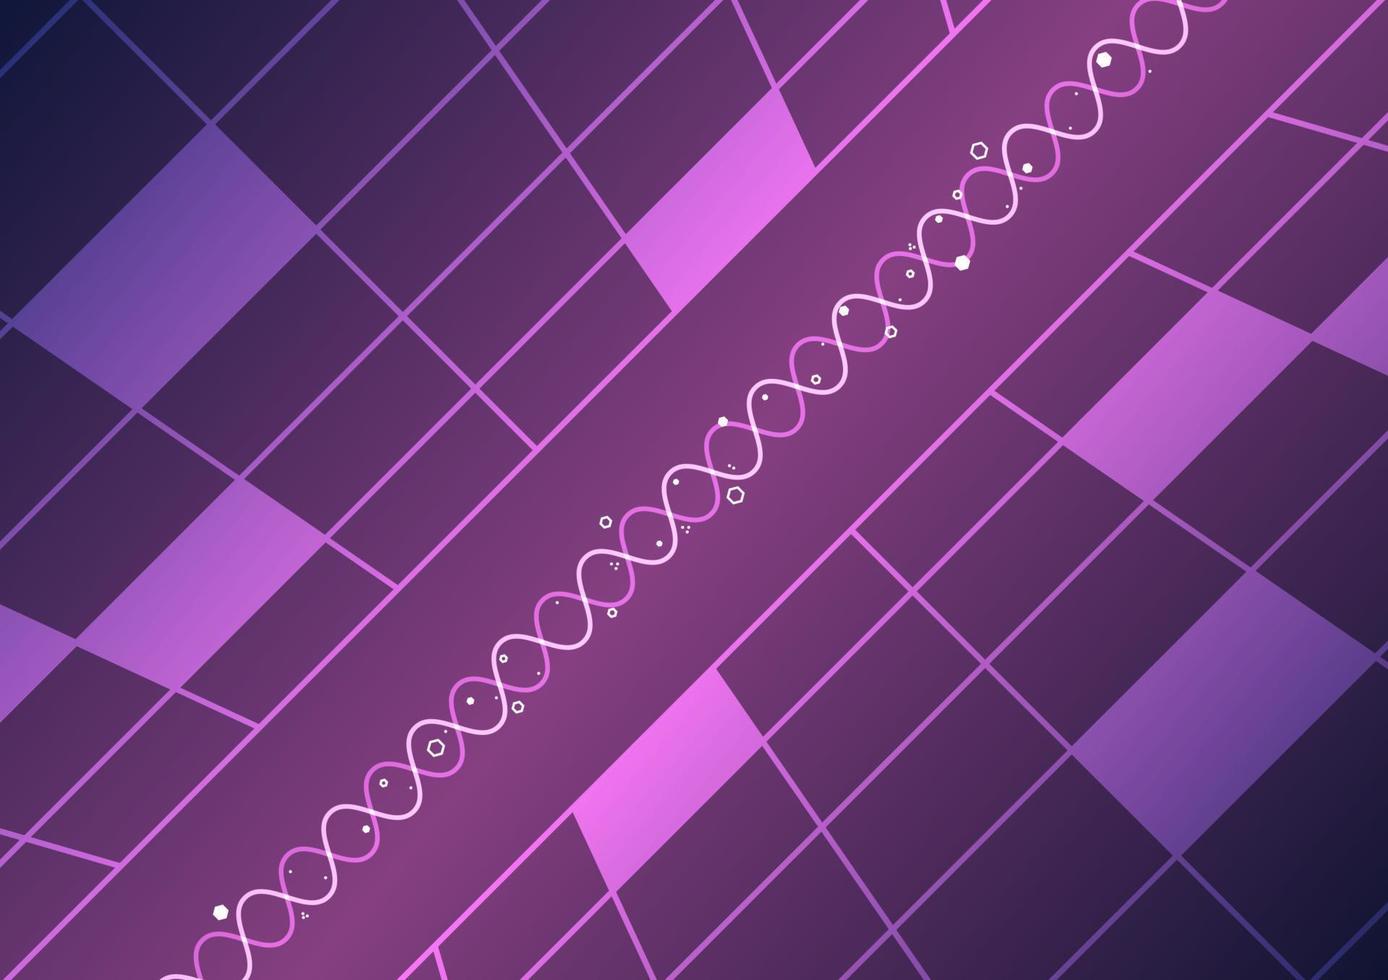 Digital technology perspective background in purple color vector